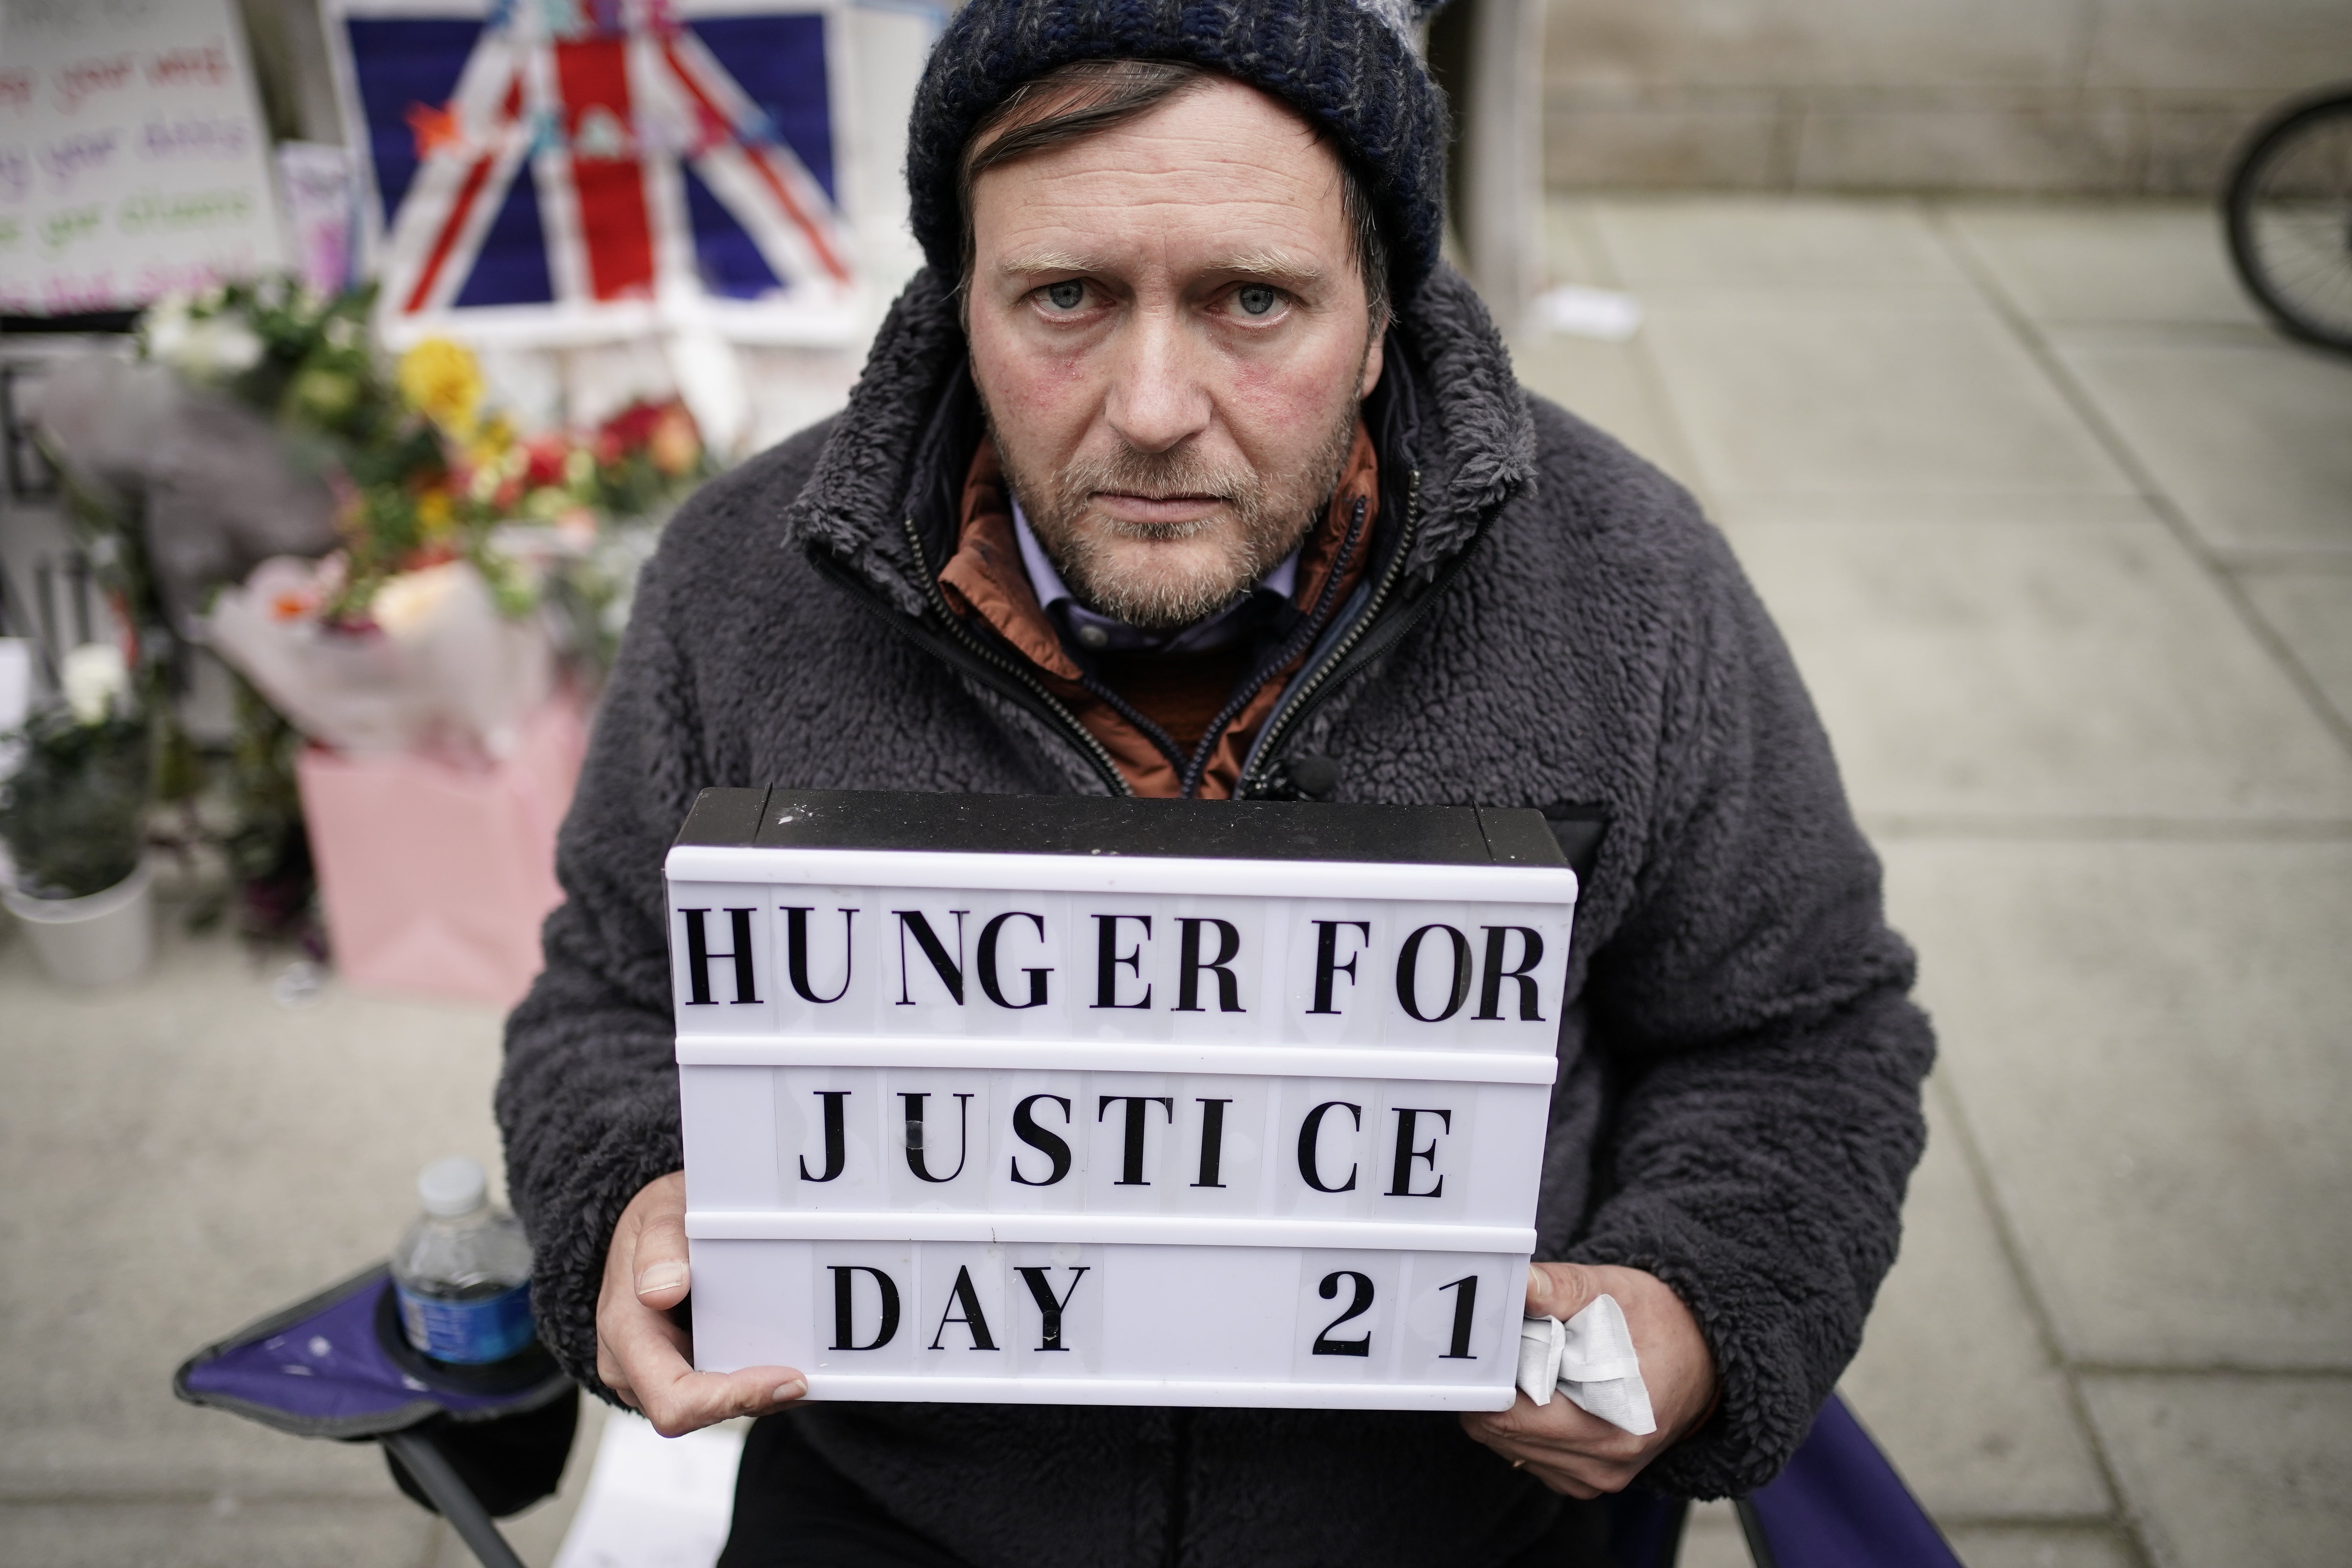 Nazanin’s husband, Richard, during his recent hunger strike outside the UK Foreign Office